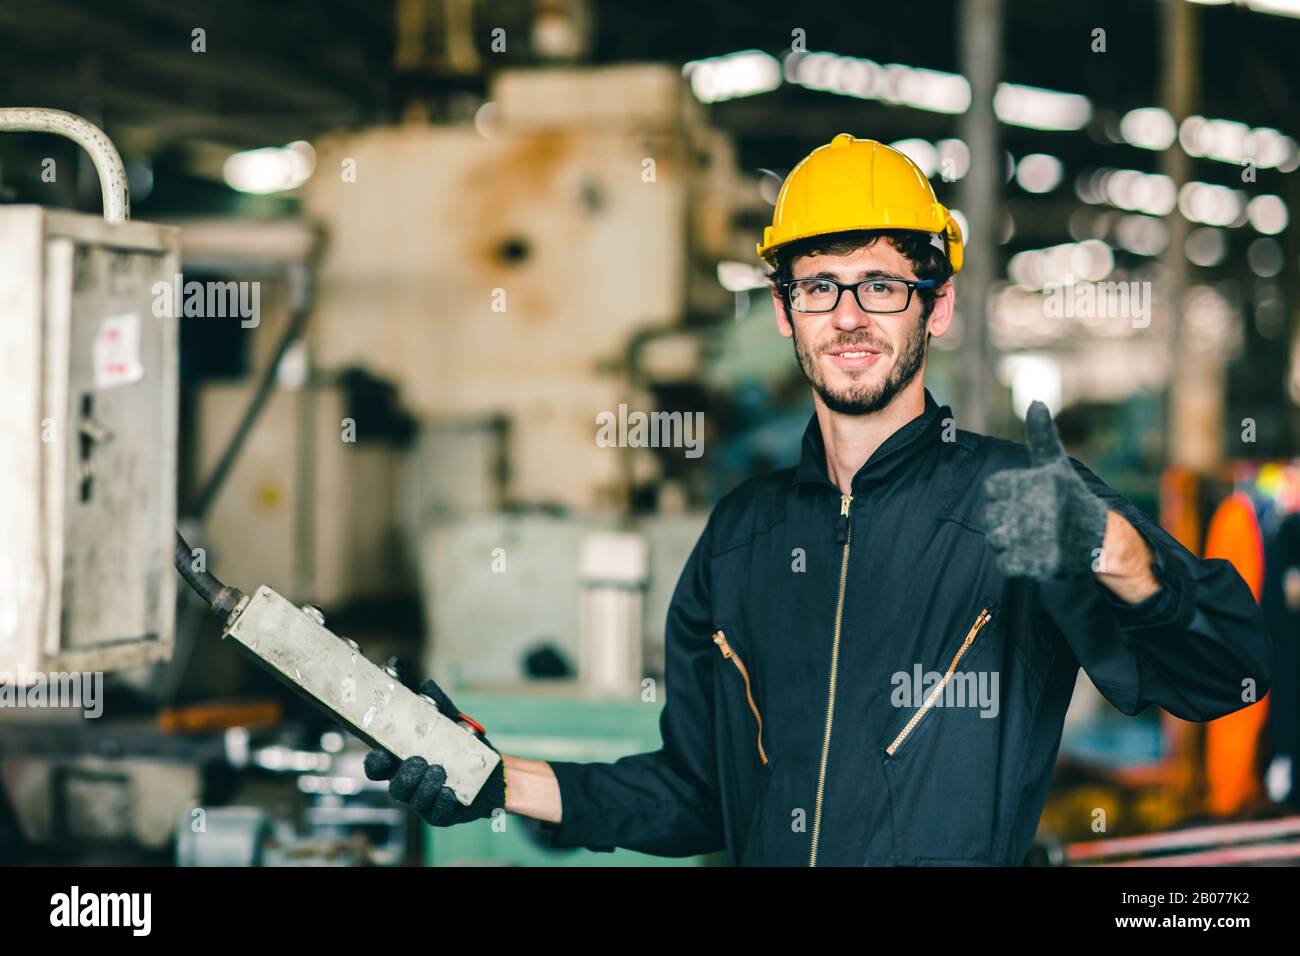 glasses nerdy worker show thumb up happy working in factory, industrial engineer man enjoy to work operate the machine. Stock Photo